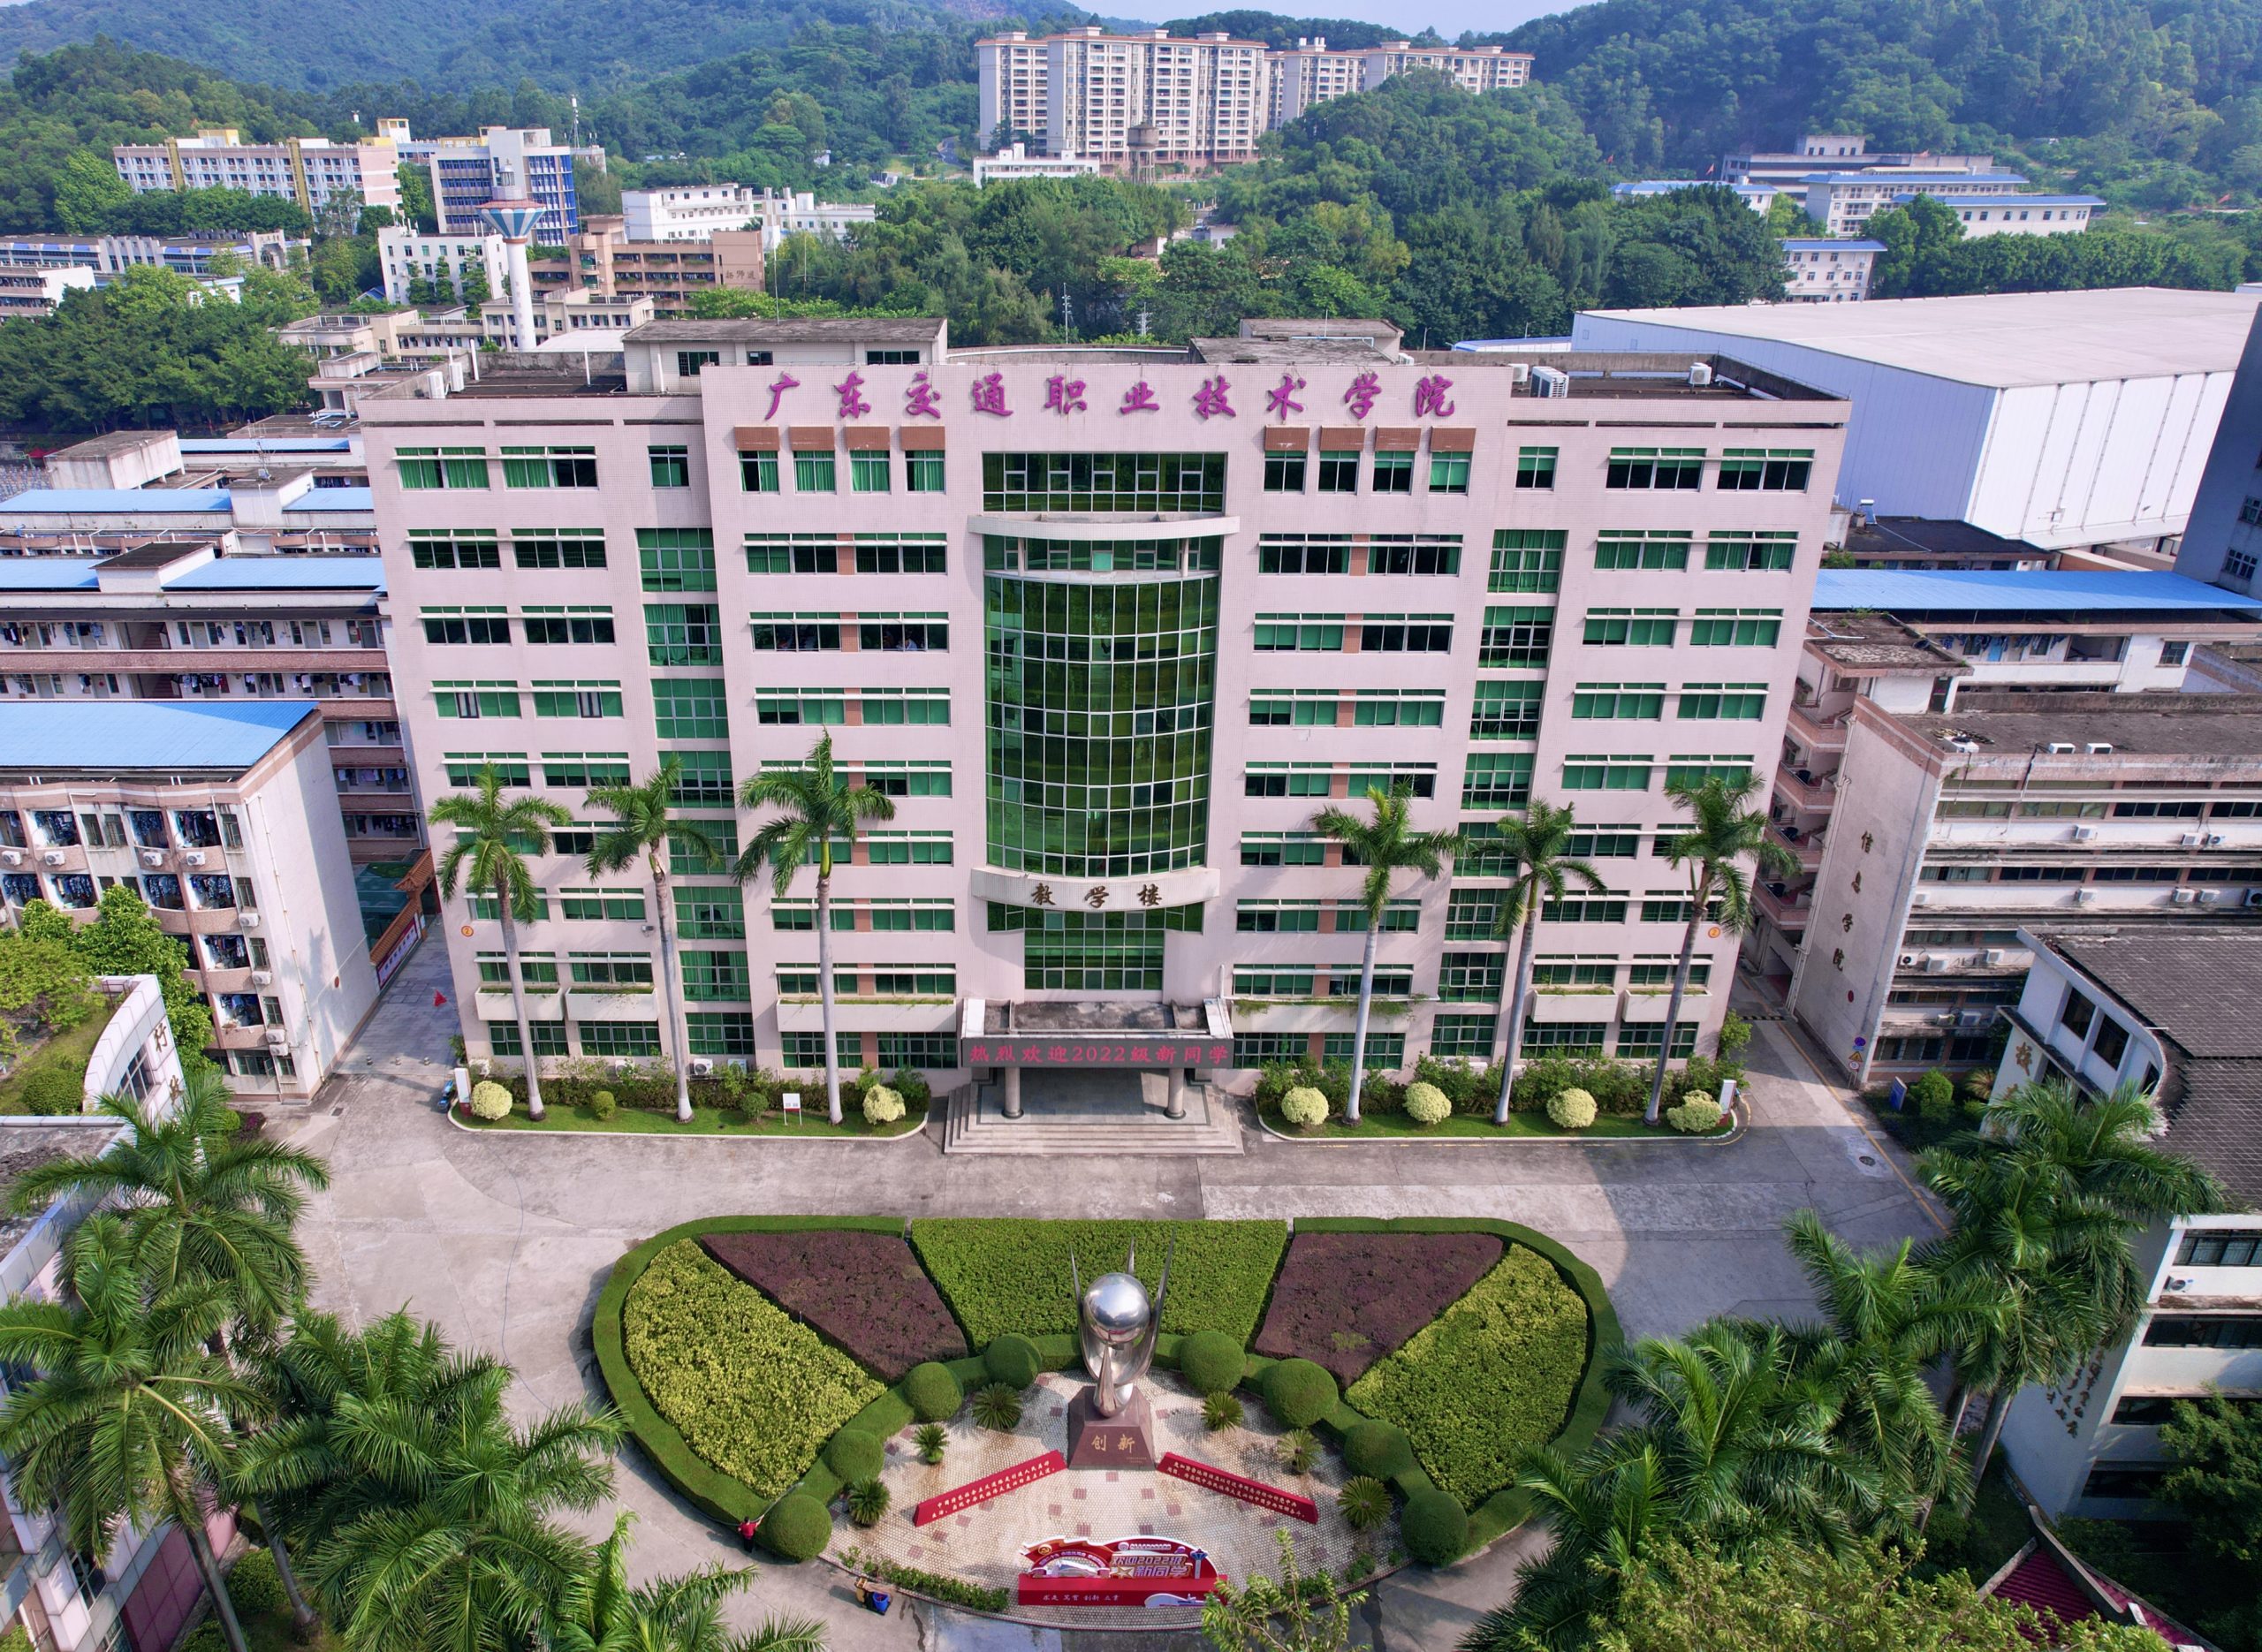 China Guangdong Communications Vocational and Technical College now offers 56 majors.